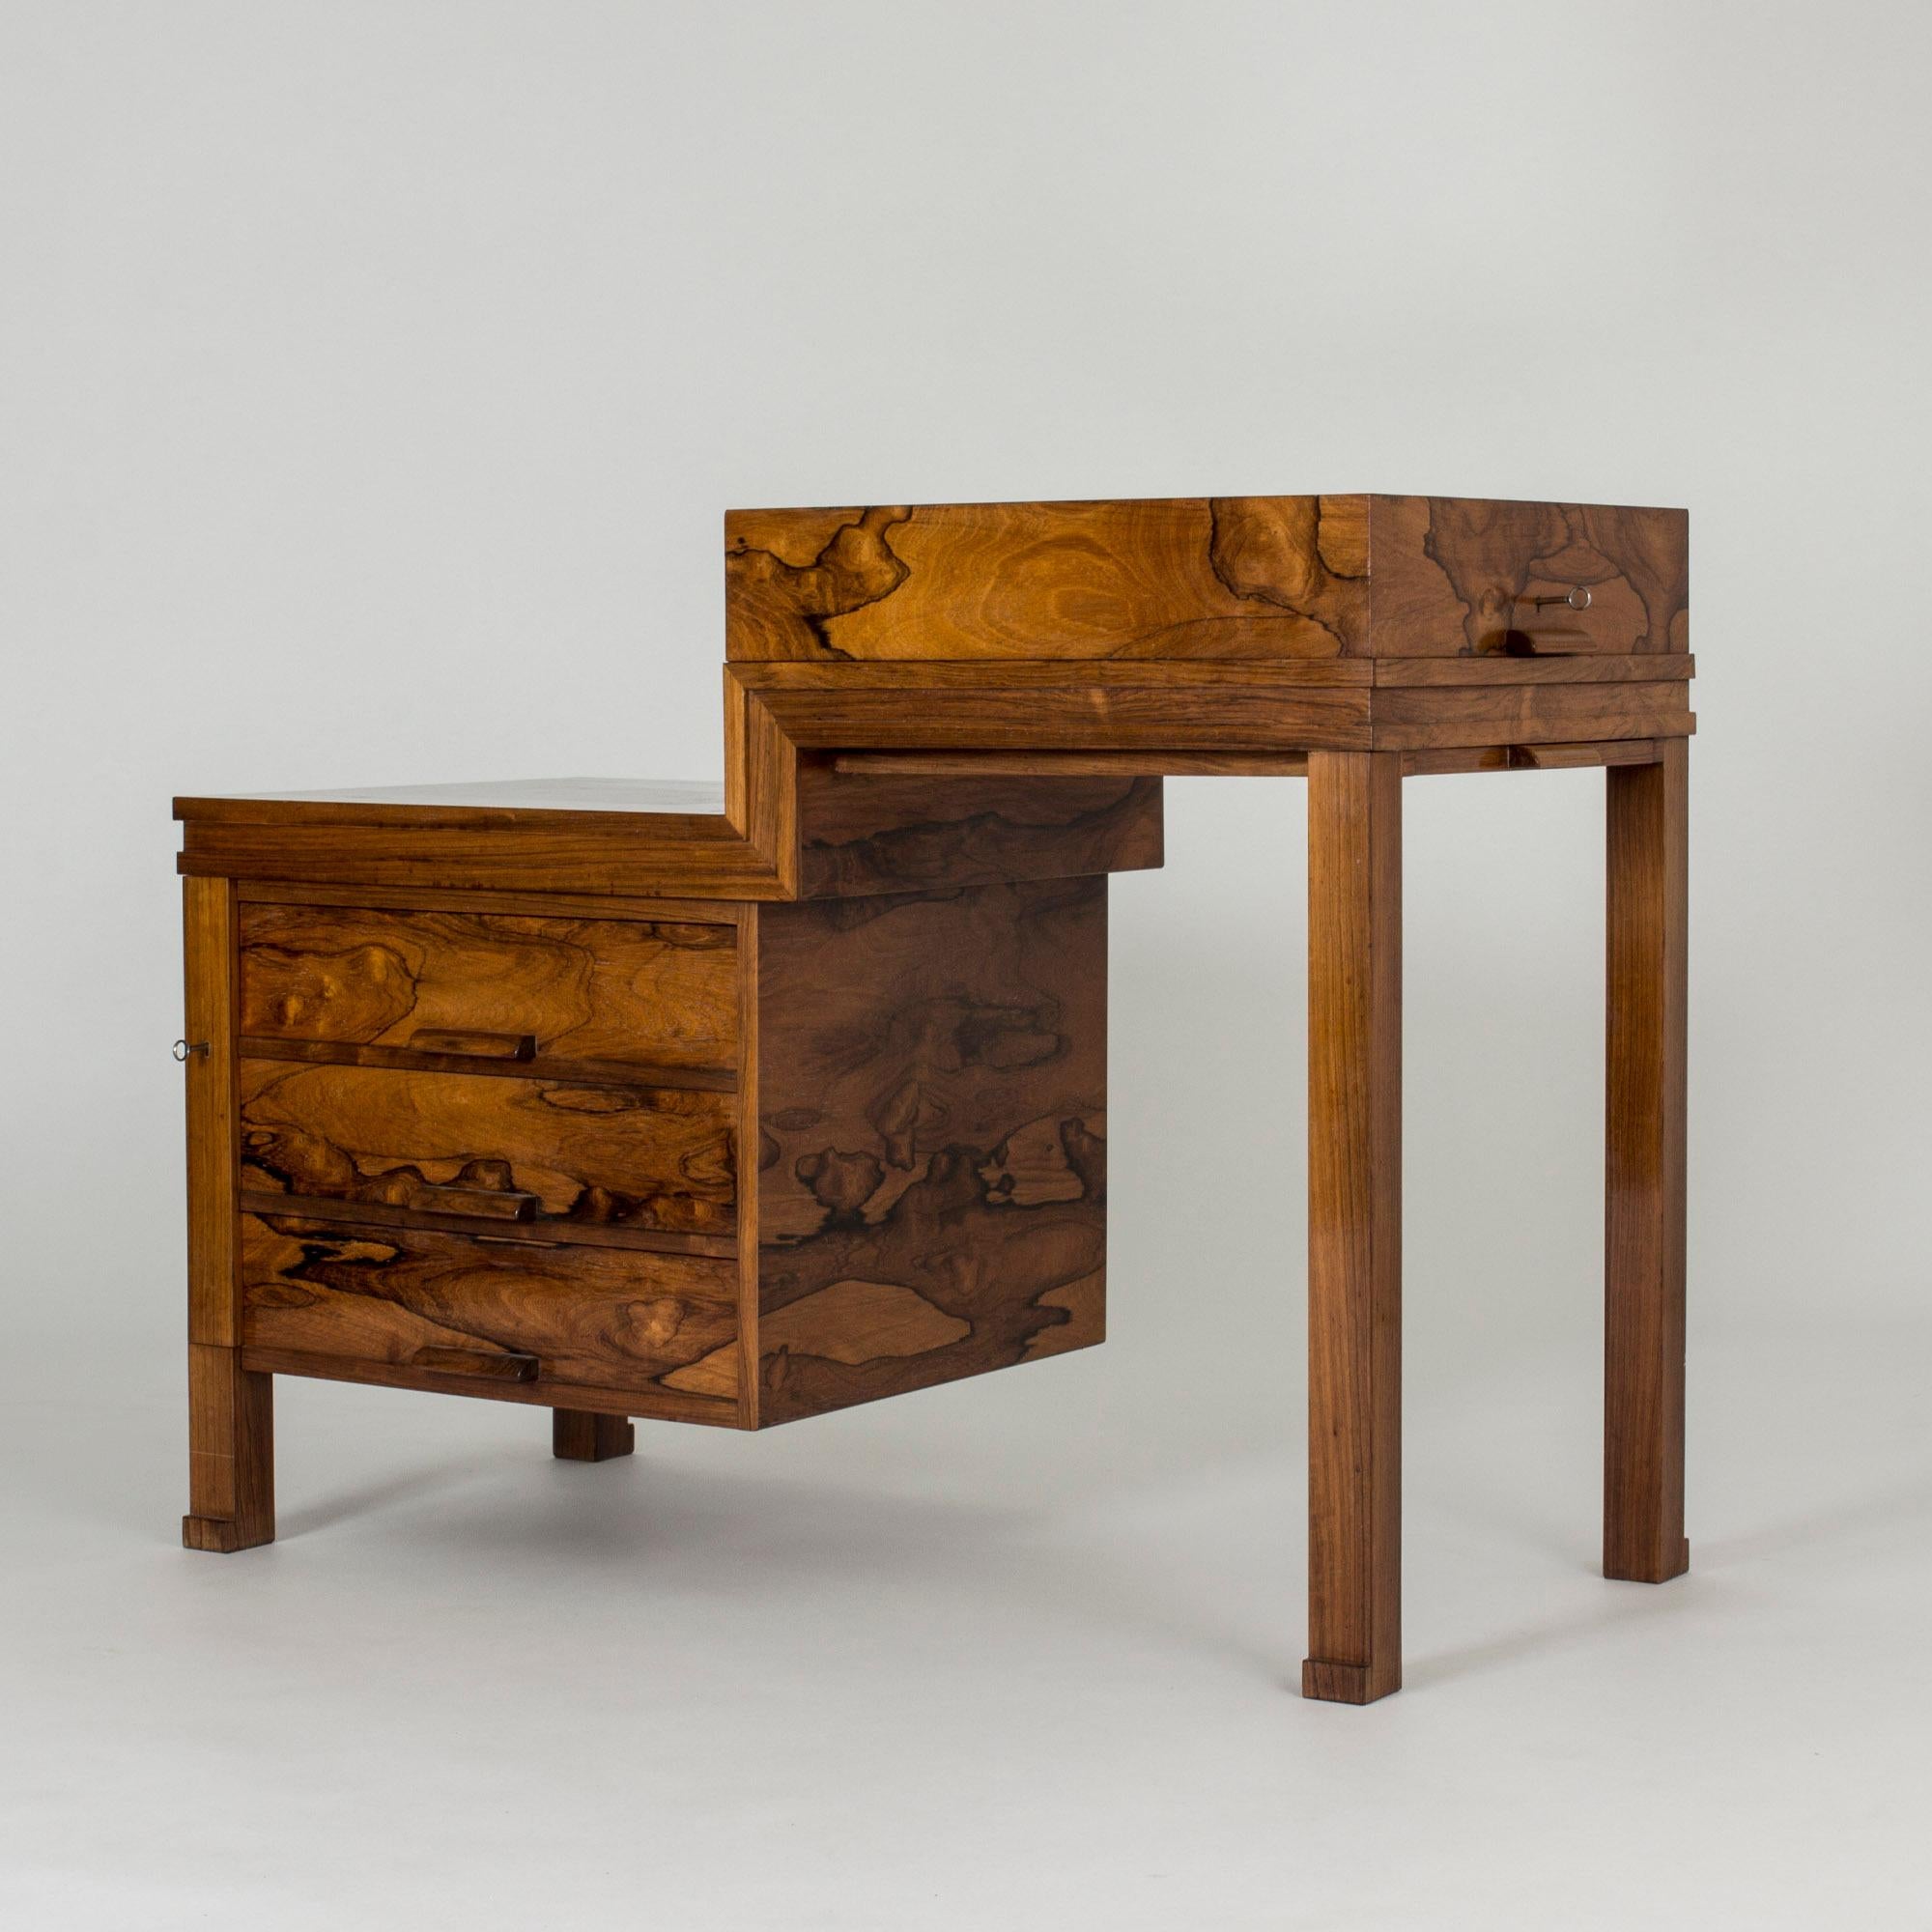 Stunning rosewood desk by Carl Hörvik, commissioned by and made for the Stockholm Exhibition in 1930 and an outstanding example of that period’s luxurious functionalism. The top opens up to reveal a turquoise velvet clad space originally designed to